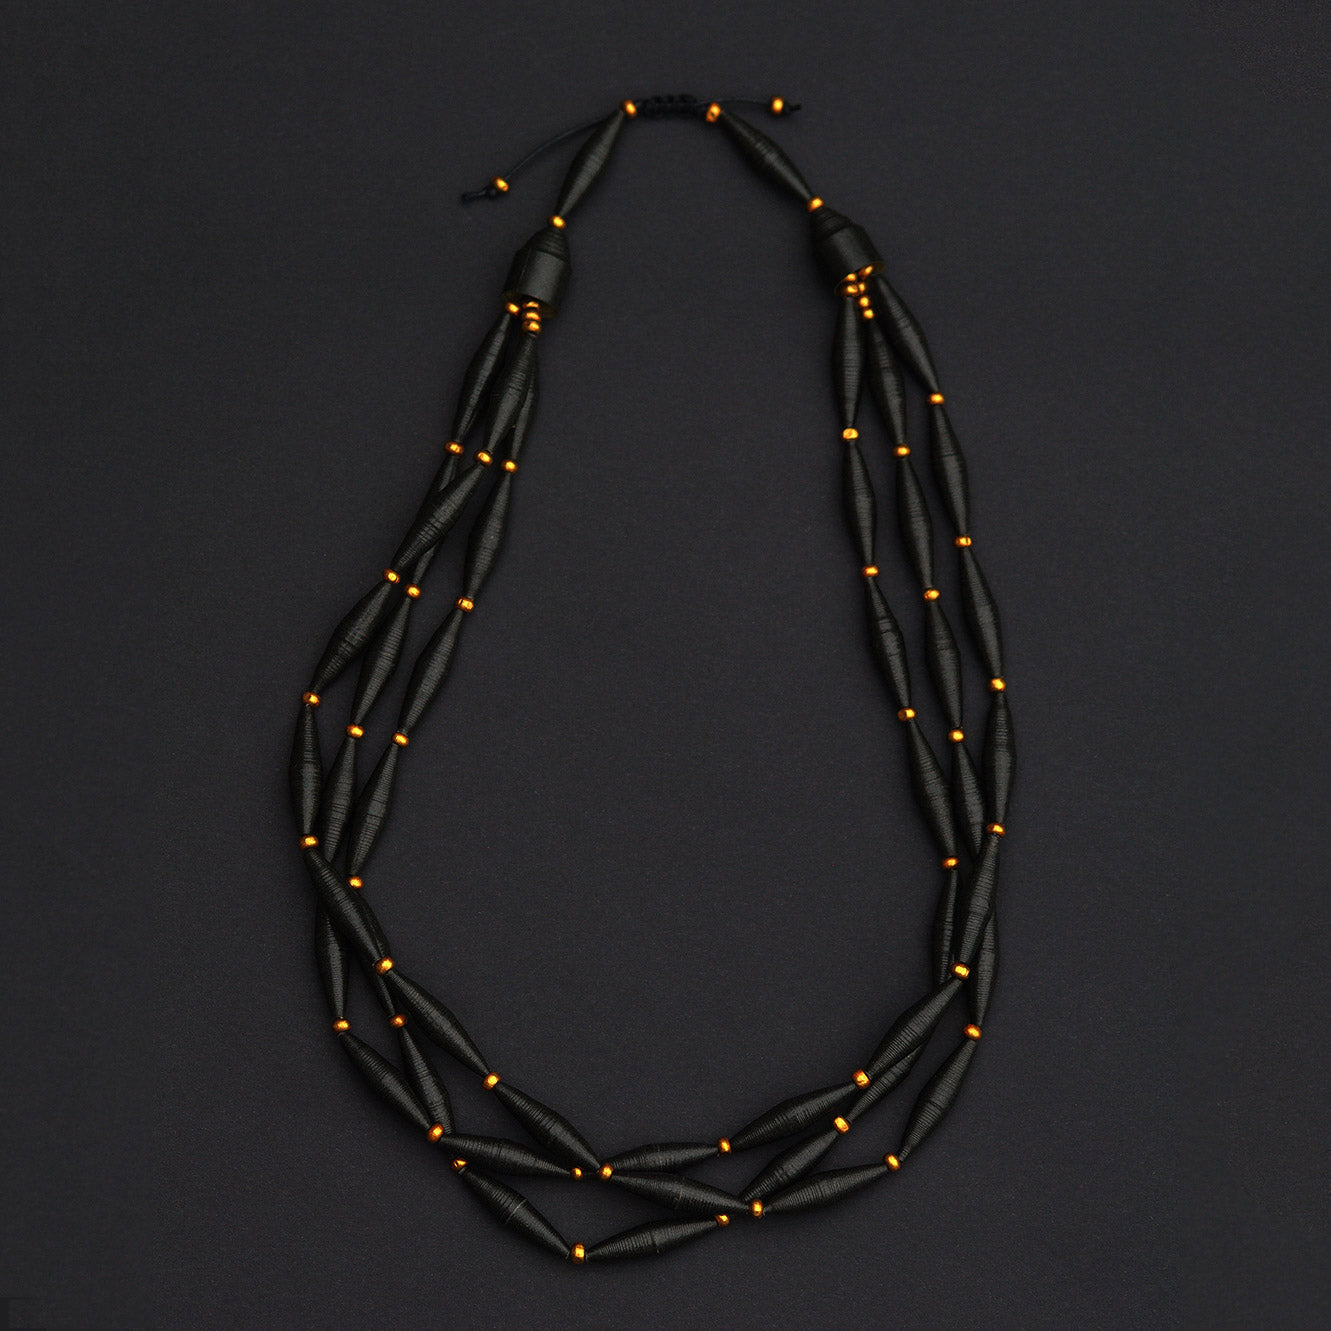 Black Paper Bead Matinee Necklace Featuring Small Golden Wood Beads Back to Black Collection Chiramo Paper Jewelry